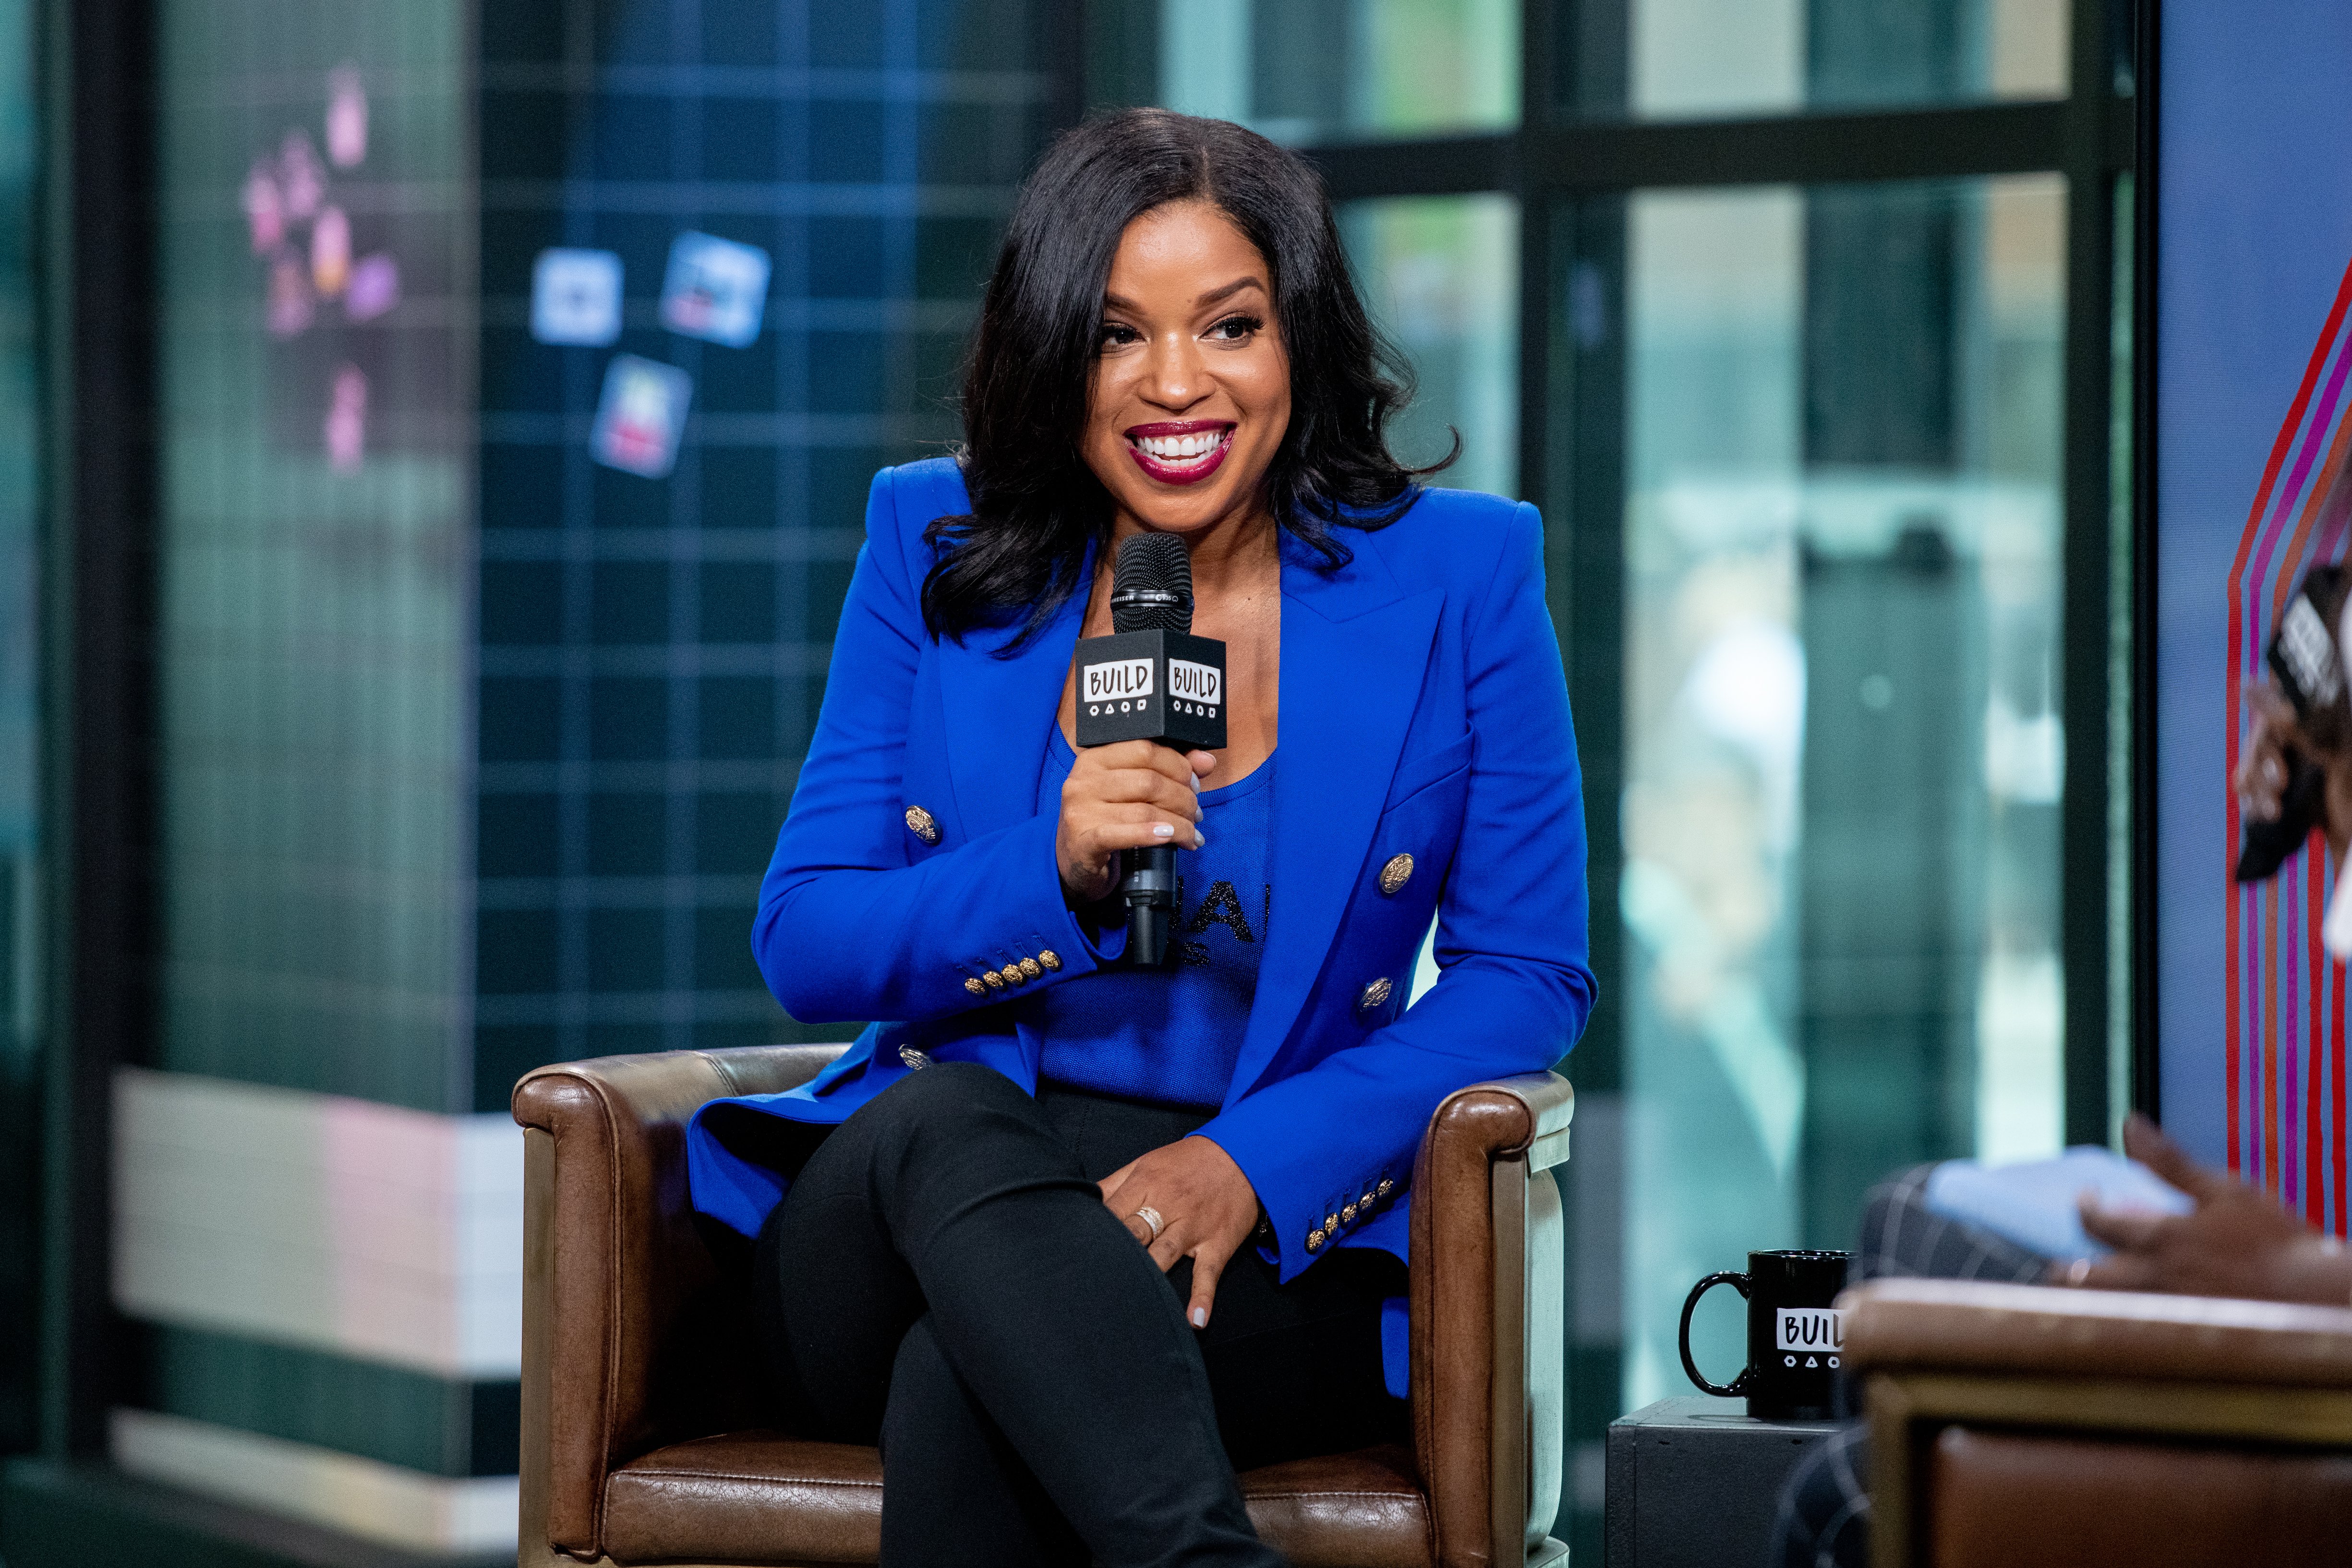 Mashonda Tifrere discusses her book "Blend" with the Build Series at Build Studio on October 2, 2018 in New York City | Photo: GettyImages